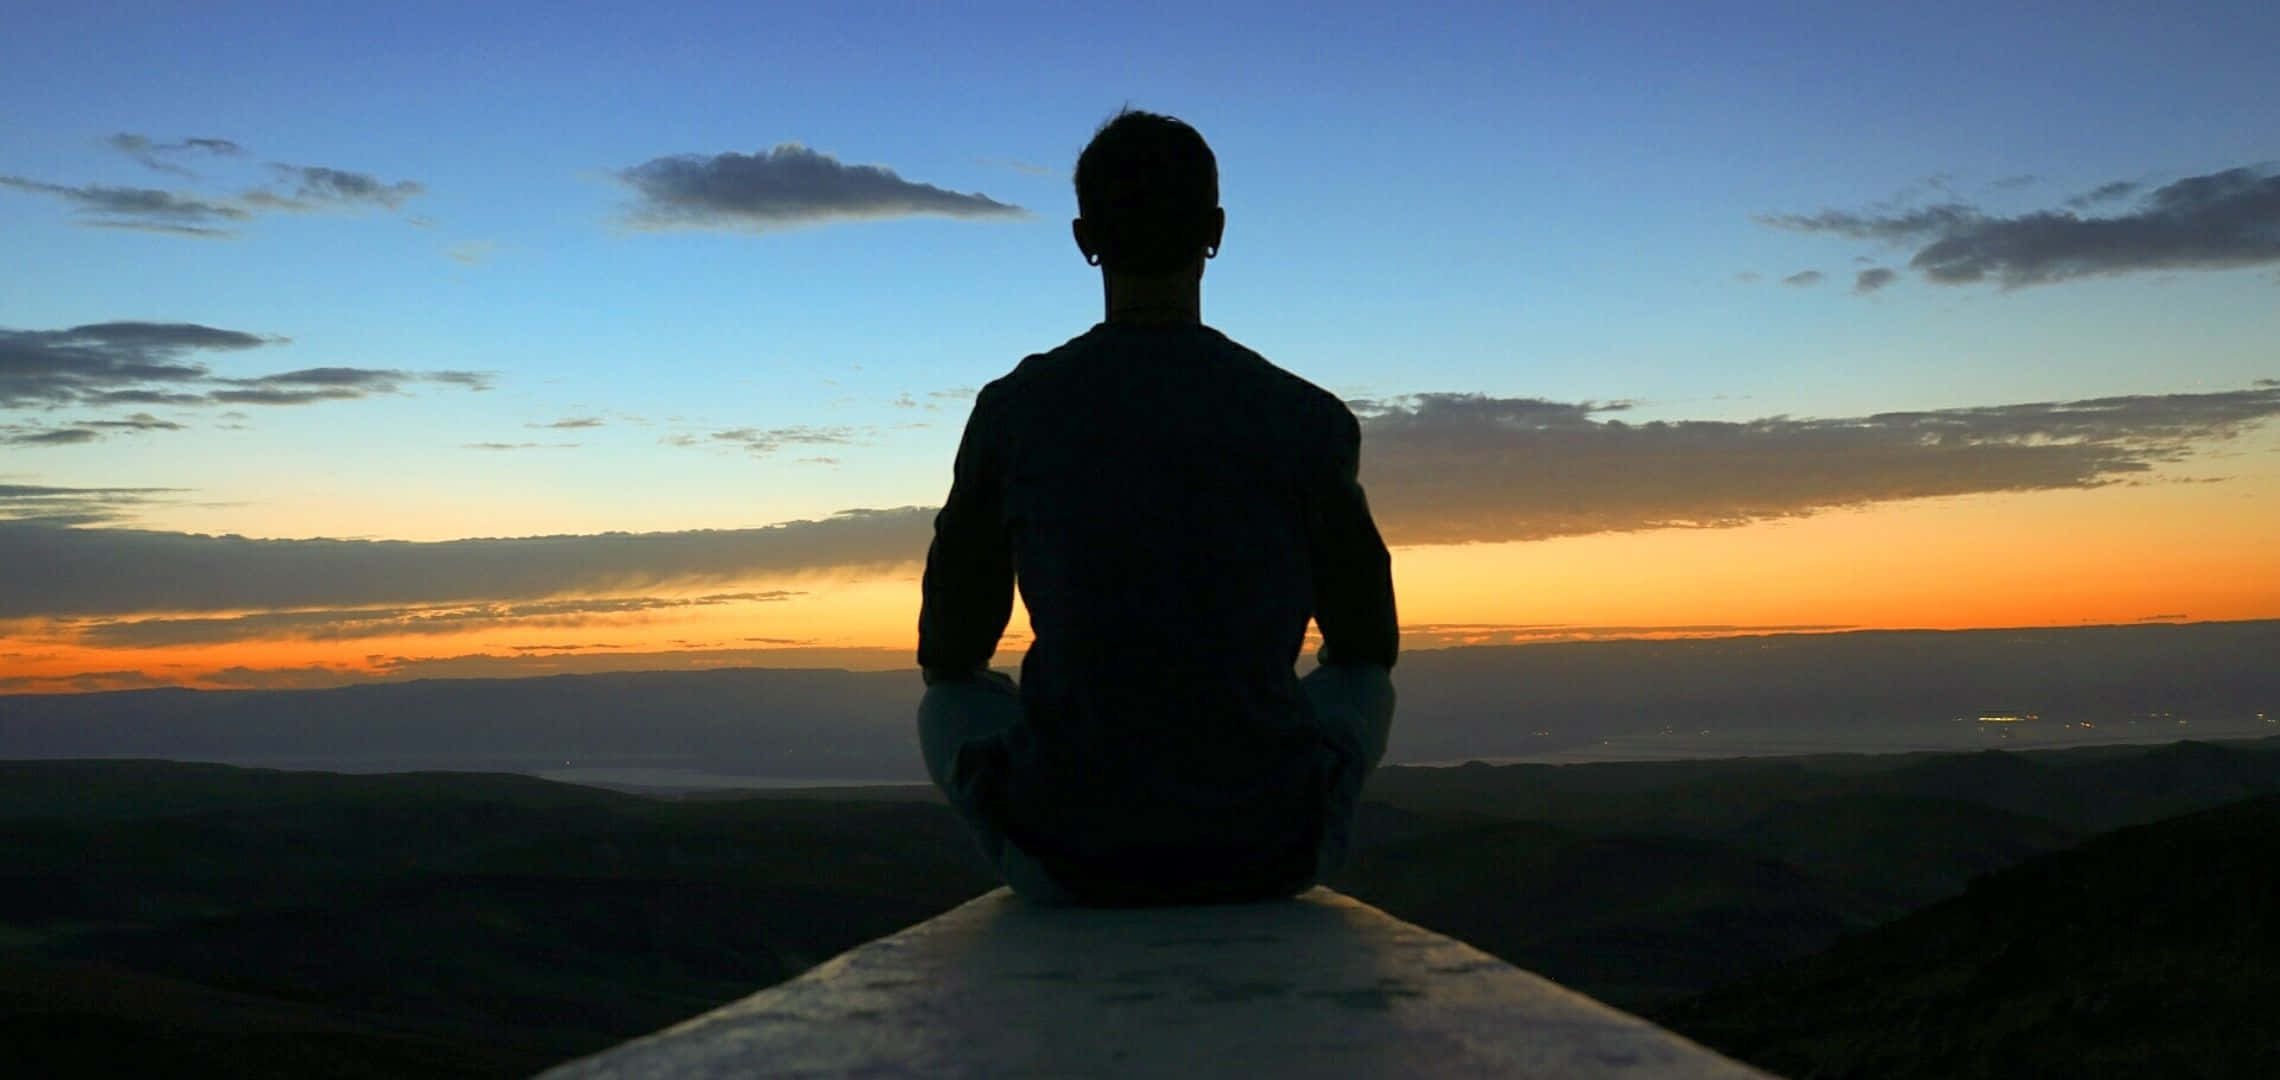 A Man Sitting On A Ledge Looking At The Sunset Wallpaper